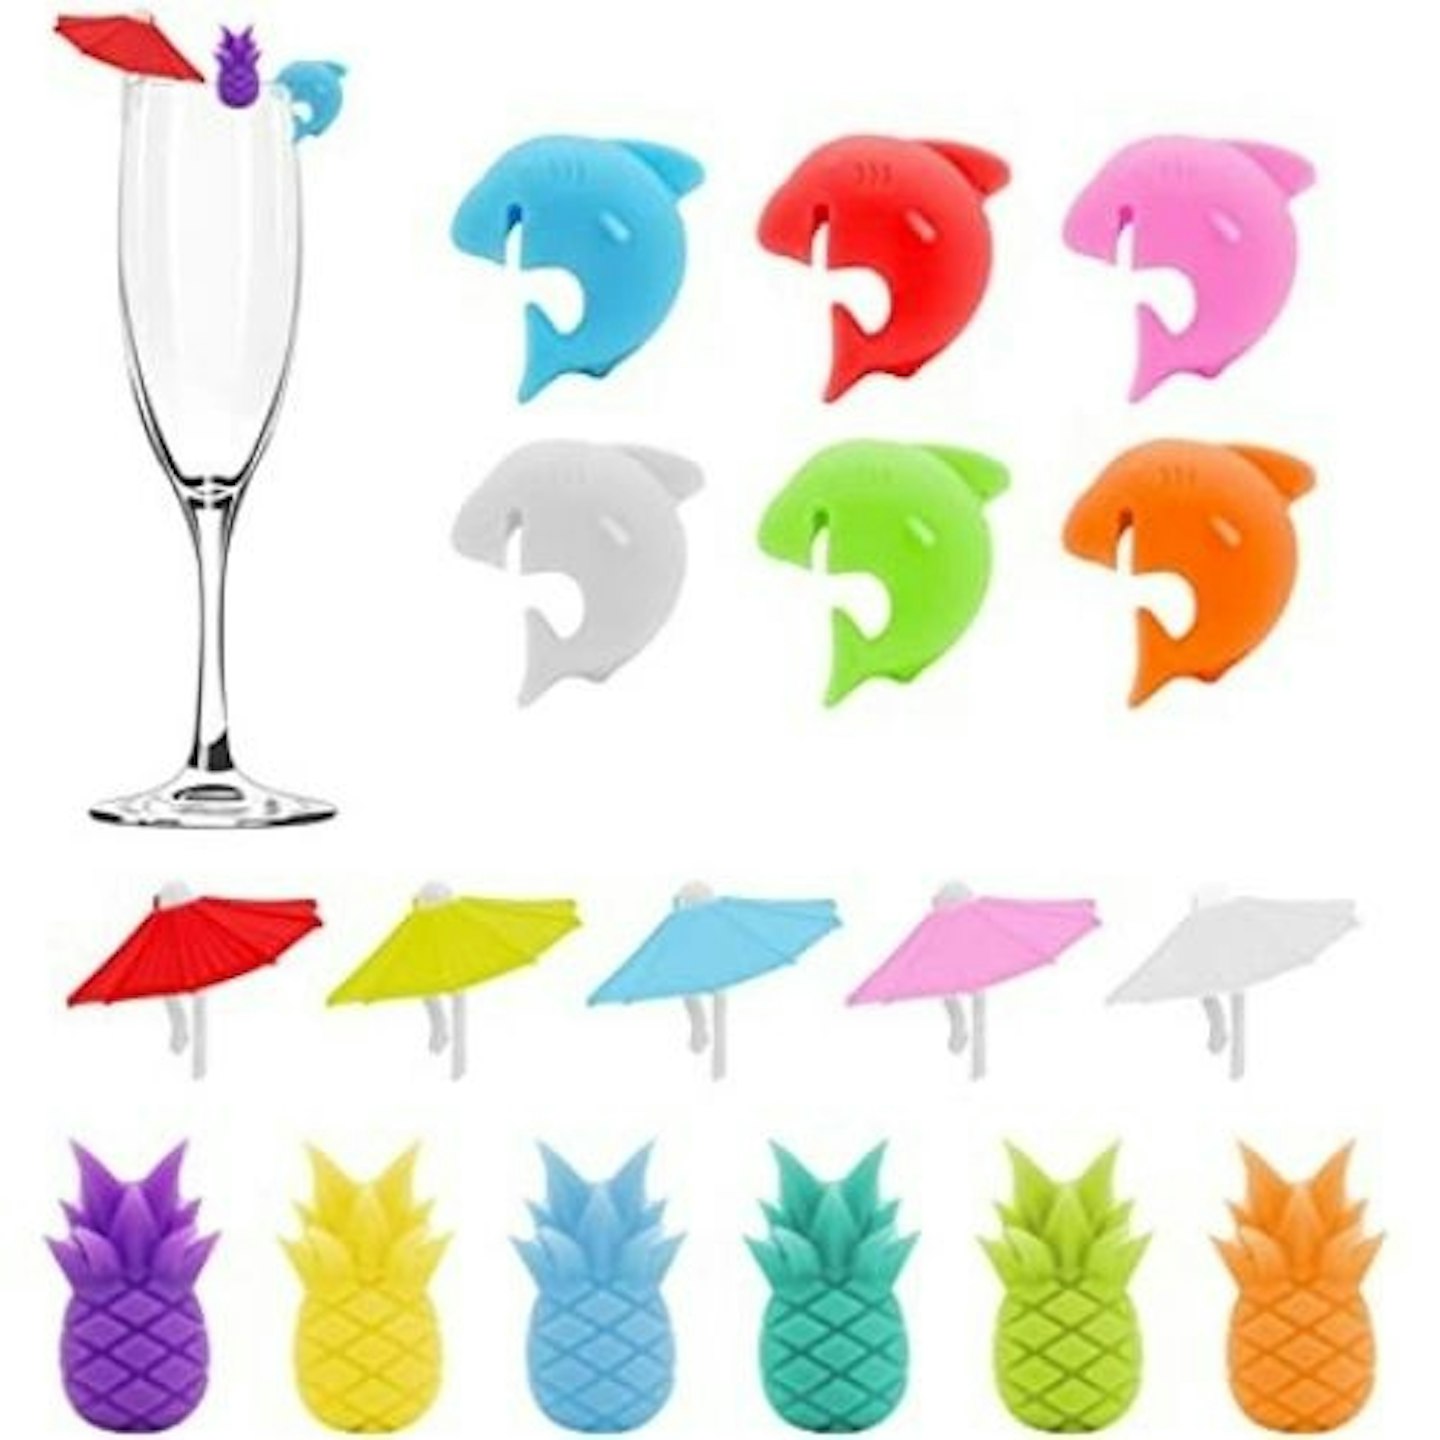 Several drink markers, colourful designs including pineapples and dolphins.